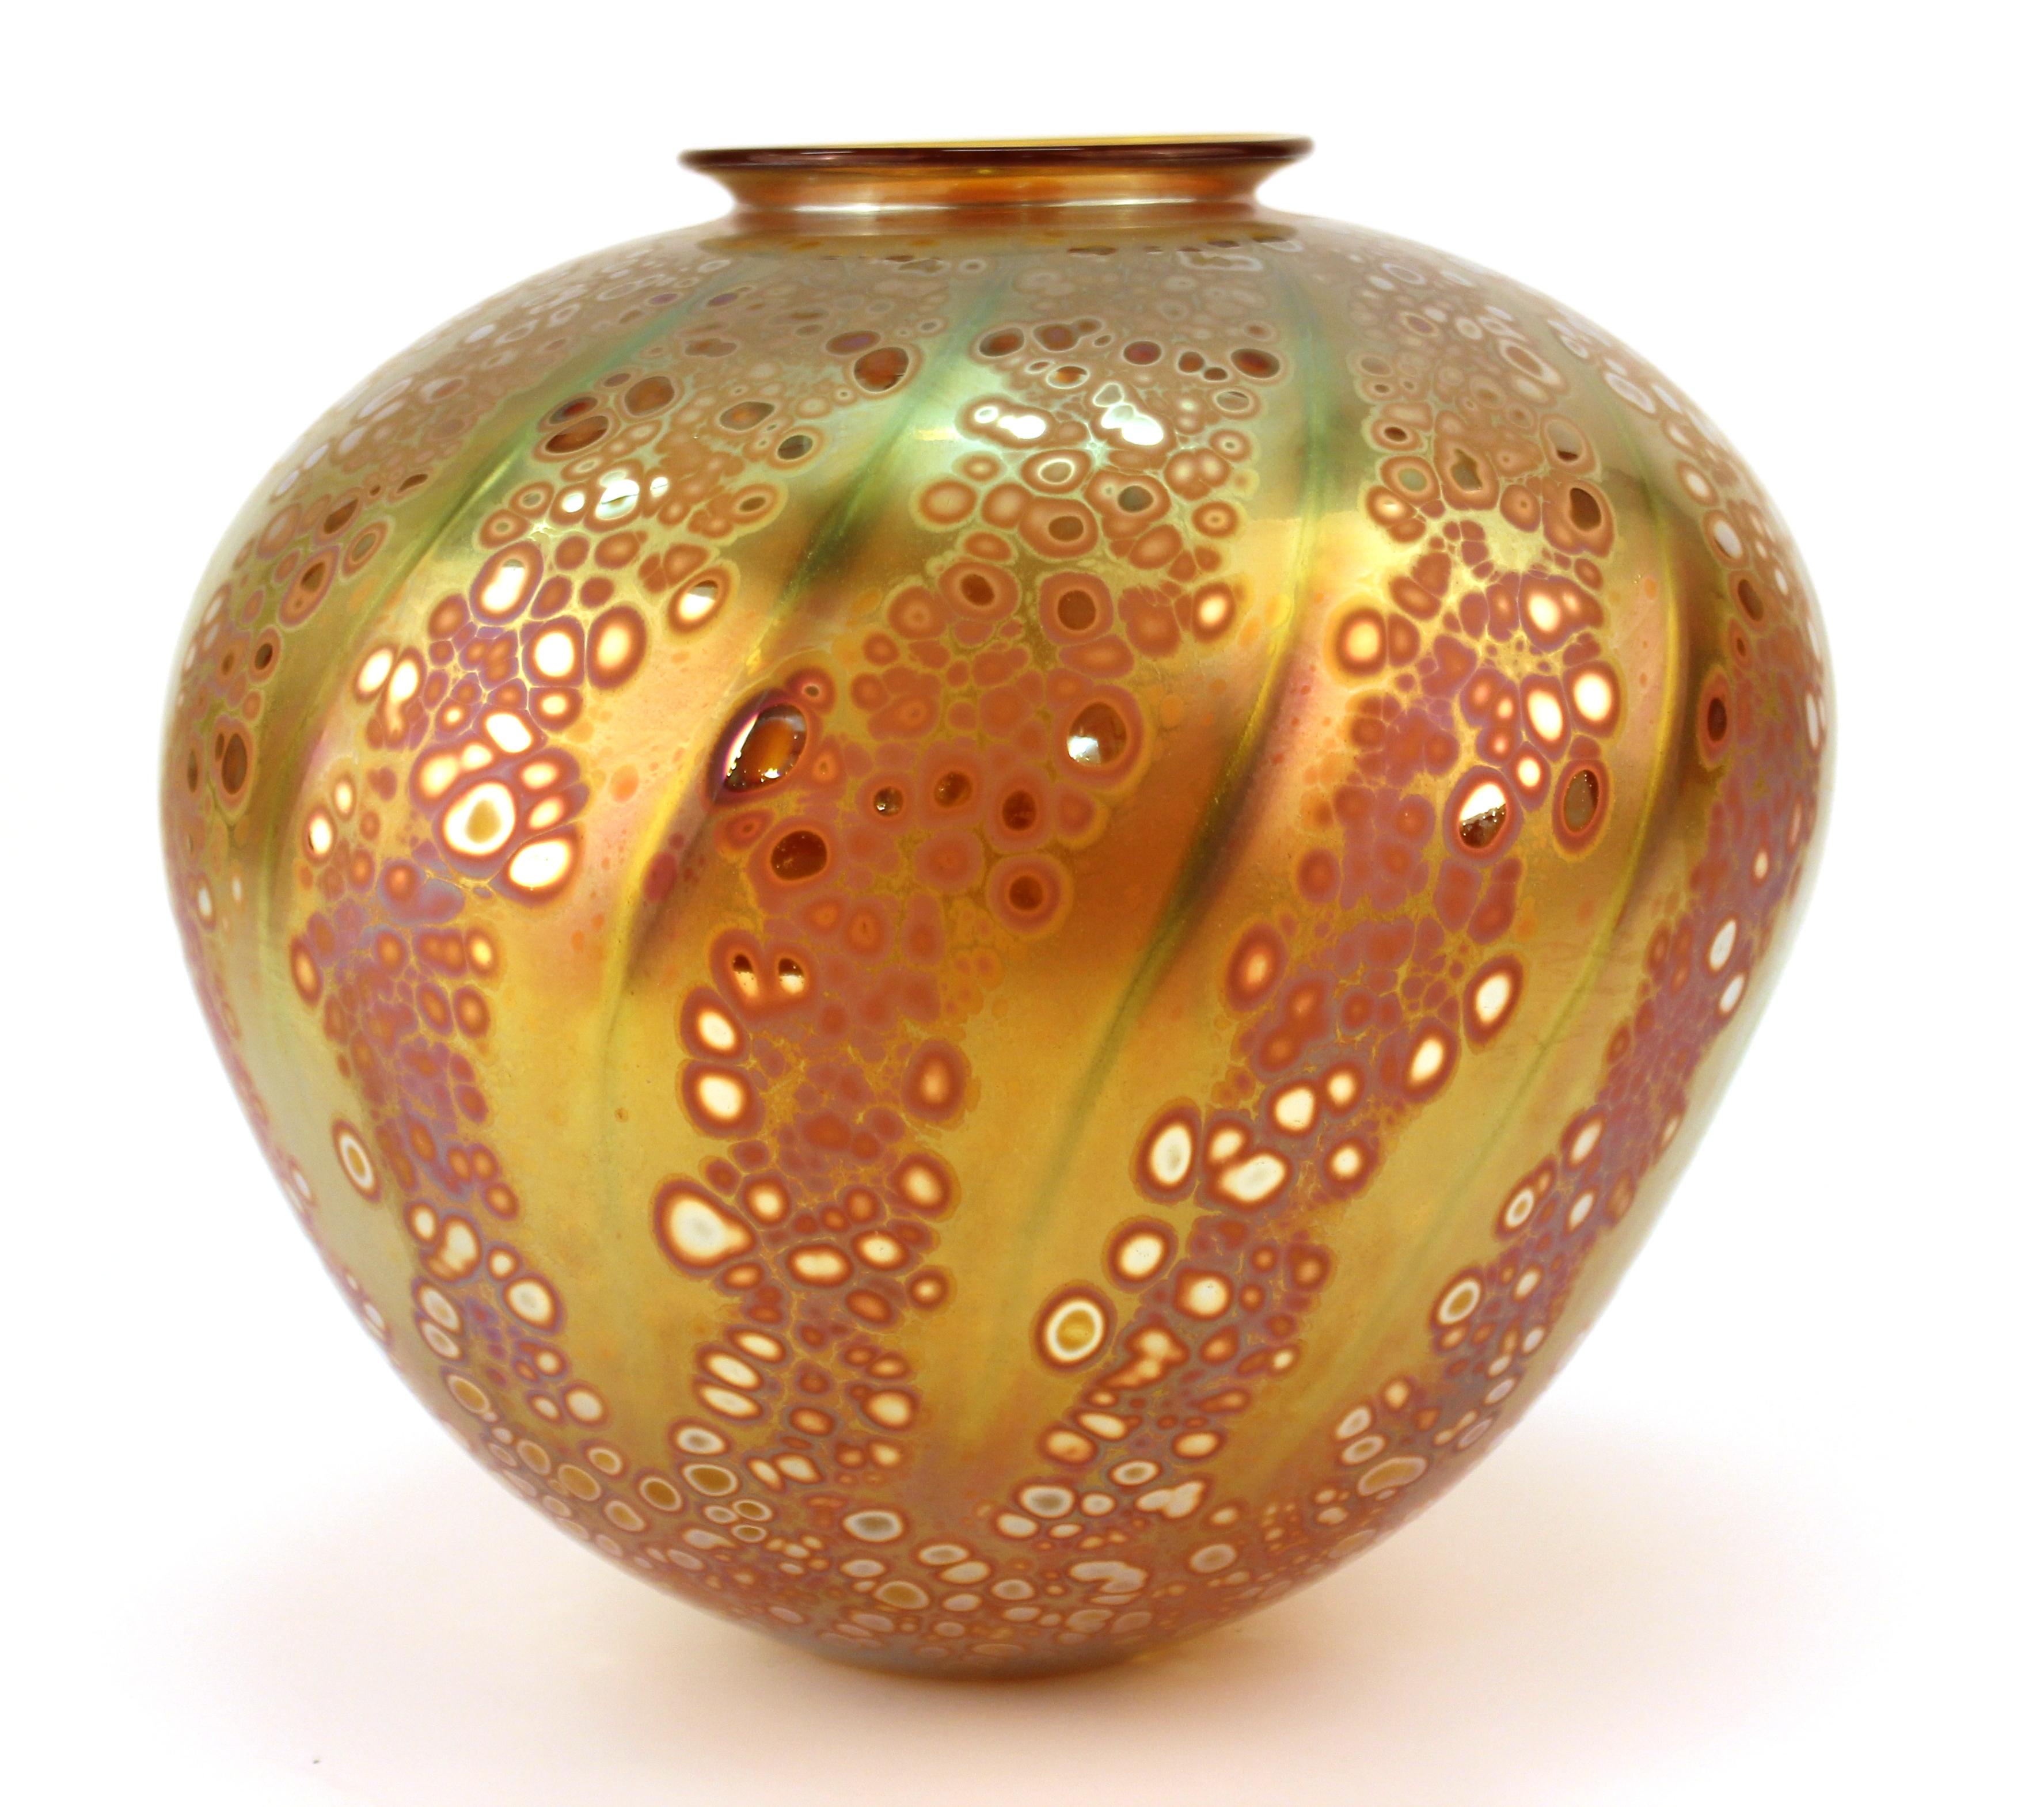 Postmodern studio art glass vase with signature and date on the bottom. The piece has iridescent elements that give it a very distinct shine and luster. Dated from 1993, the vase is in great vintage condition.